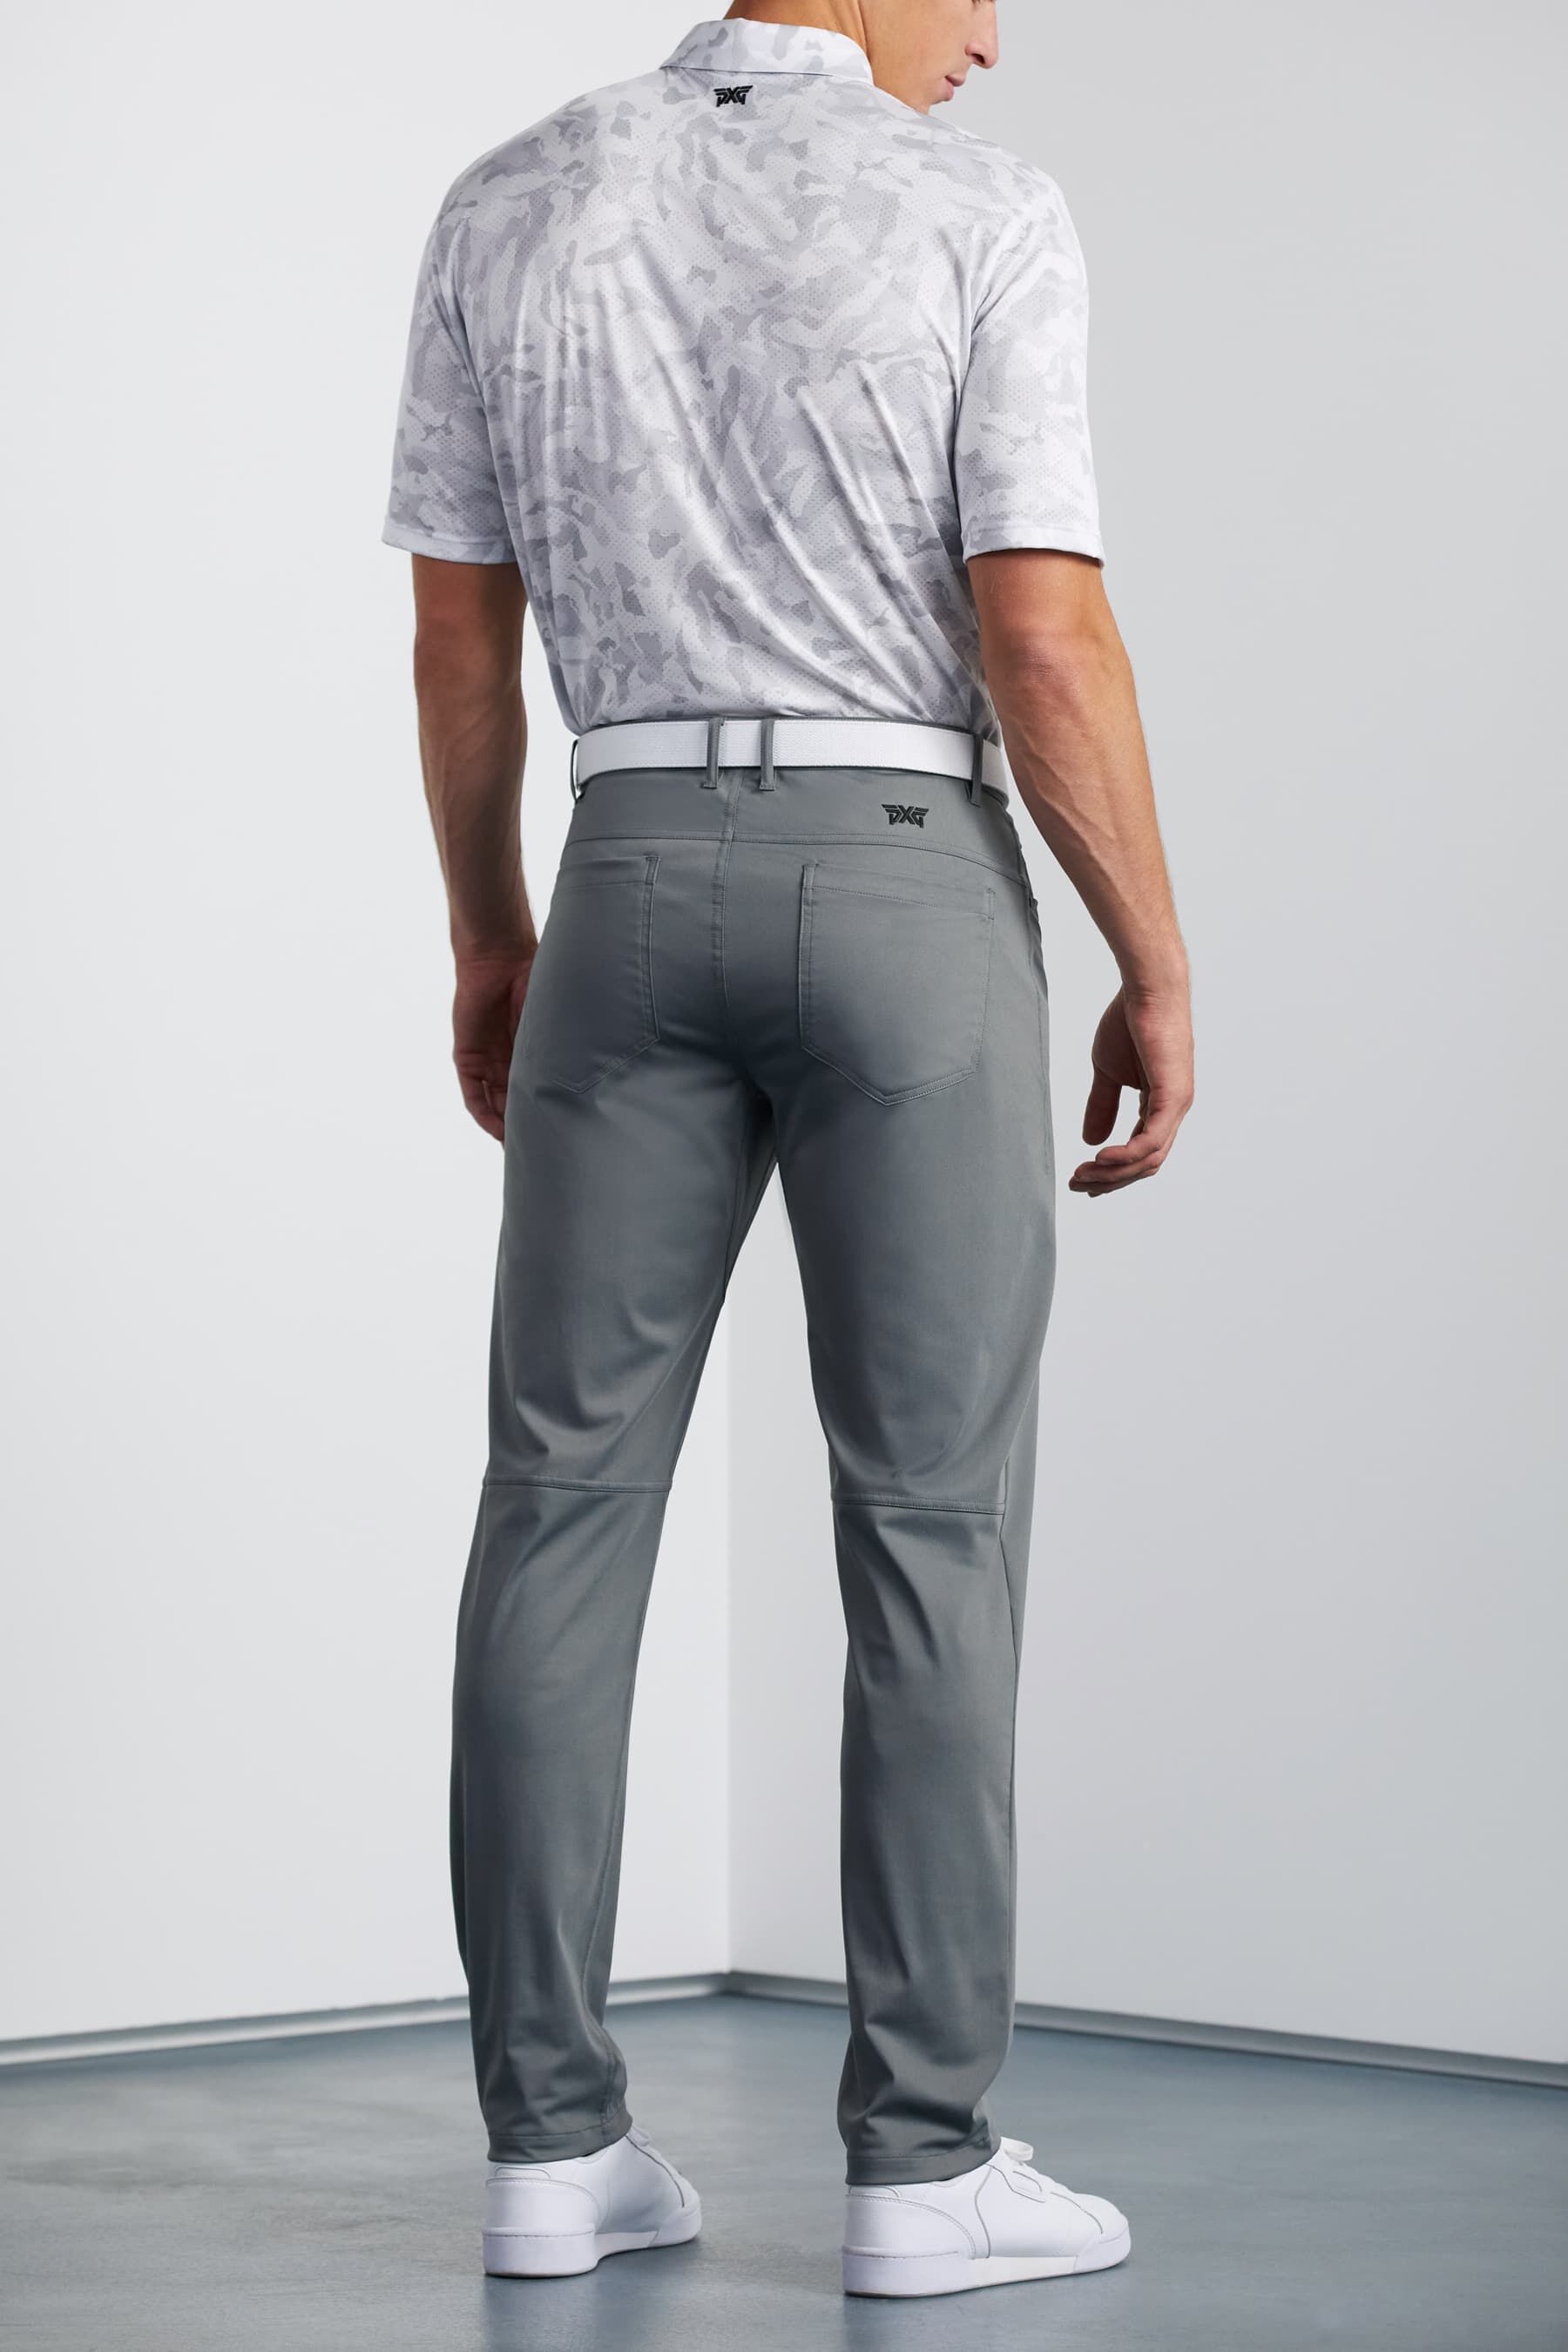 Essential Golf Pants | Men's Golf Pants and Shorts | PXG